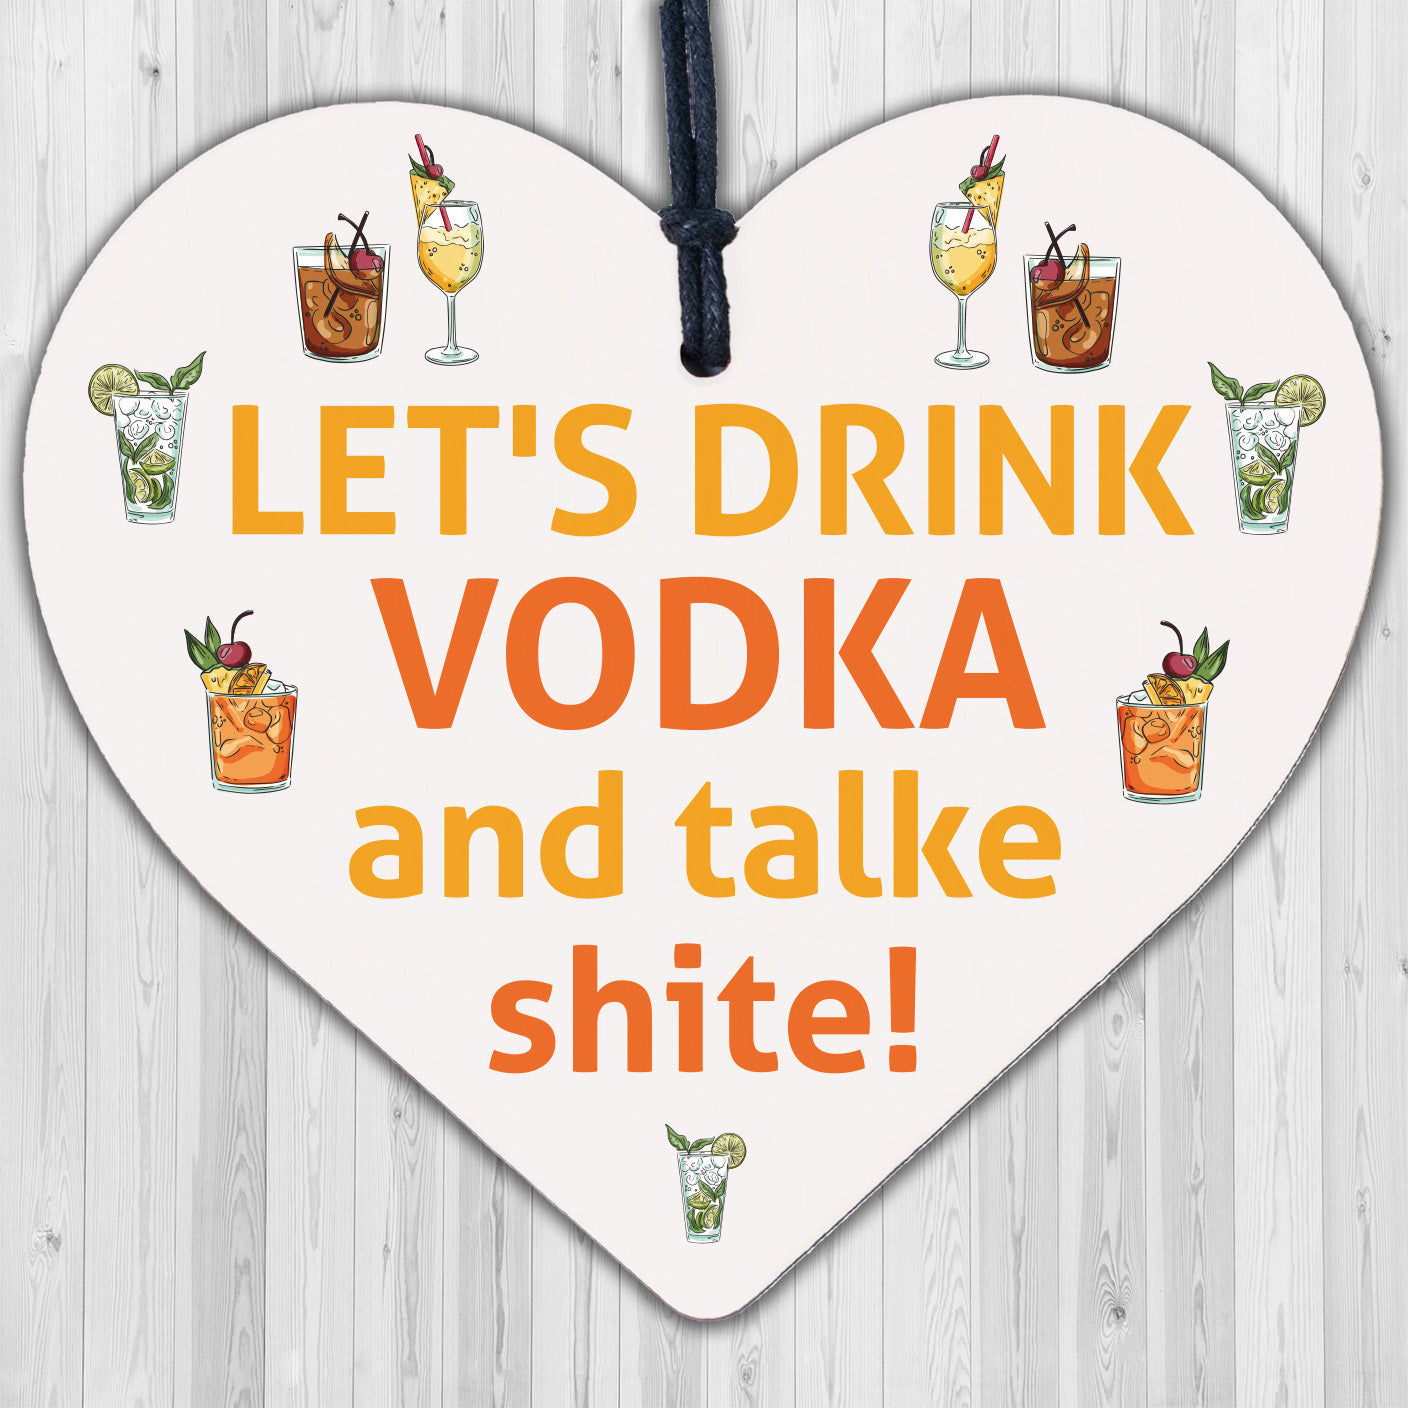 Vodka Novelty Funny Wood Heart Sign Alcohol Home Bar Friendship Gift Plaque